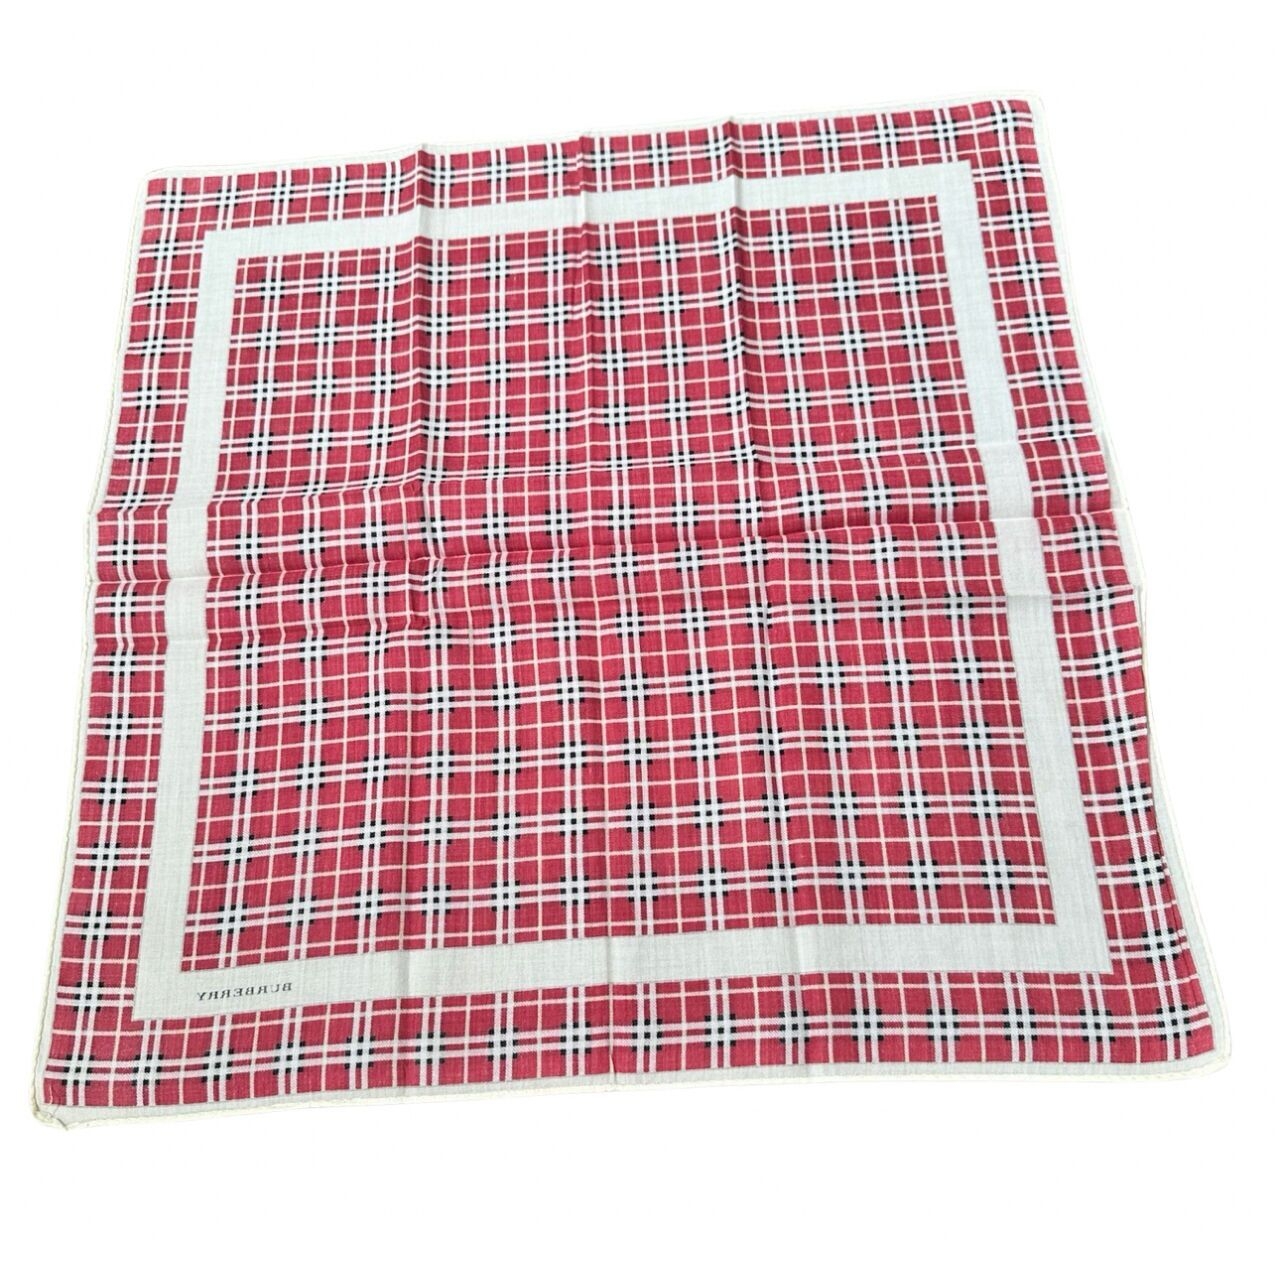 Burberry Red Plaid Scarf